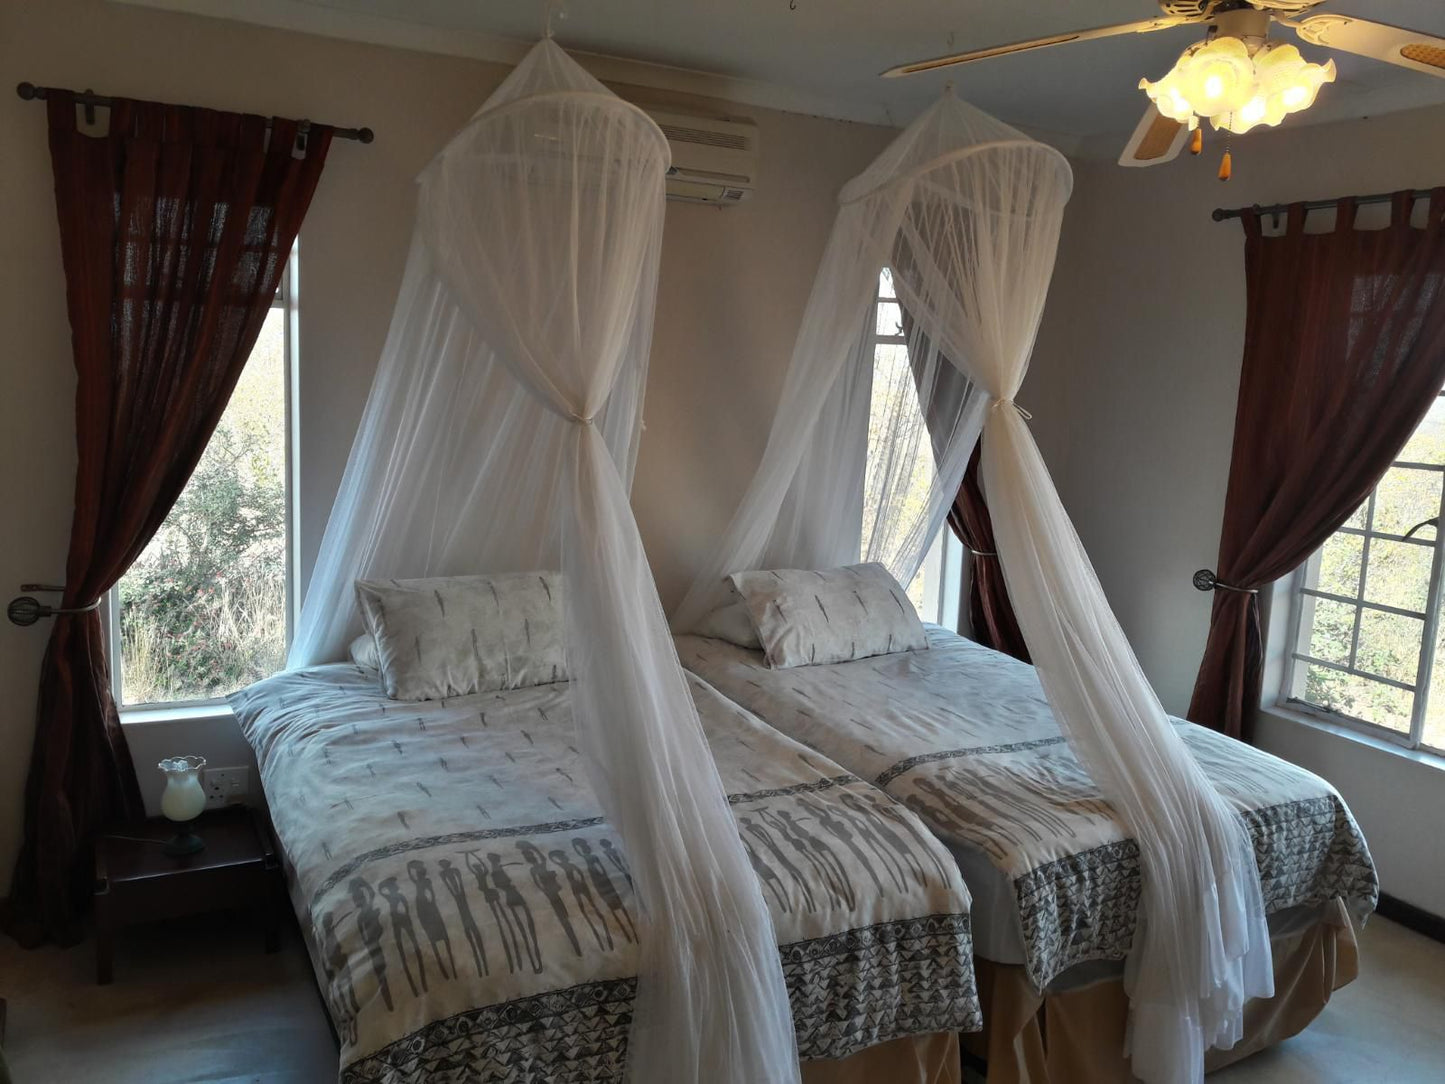 Antares Bush Camp And Safaris Grietjie Nature Reserve Limpopo Province South Africa Bedroom